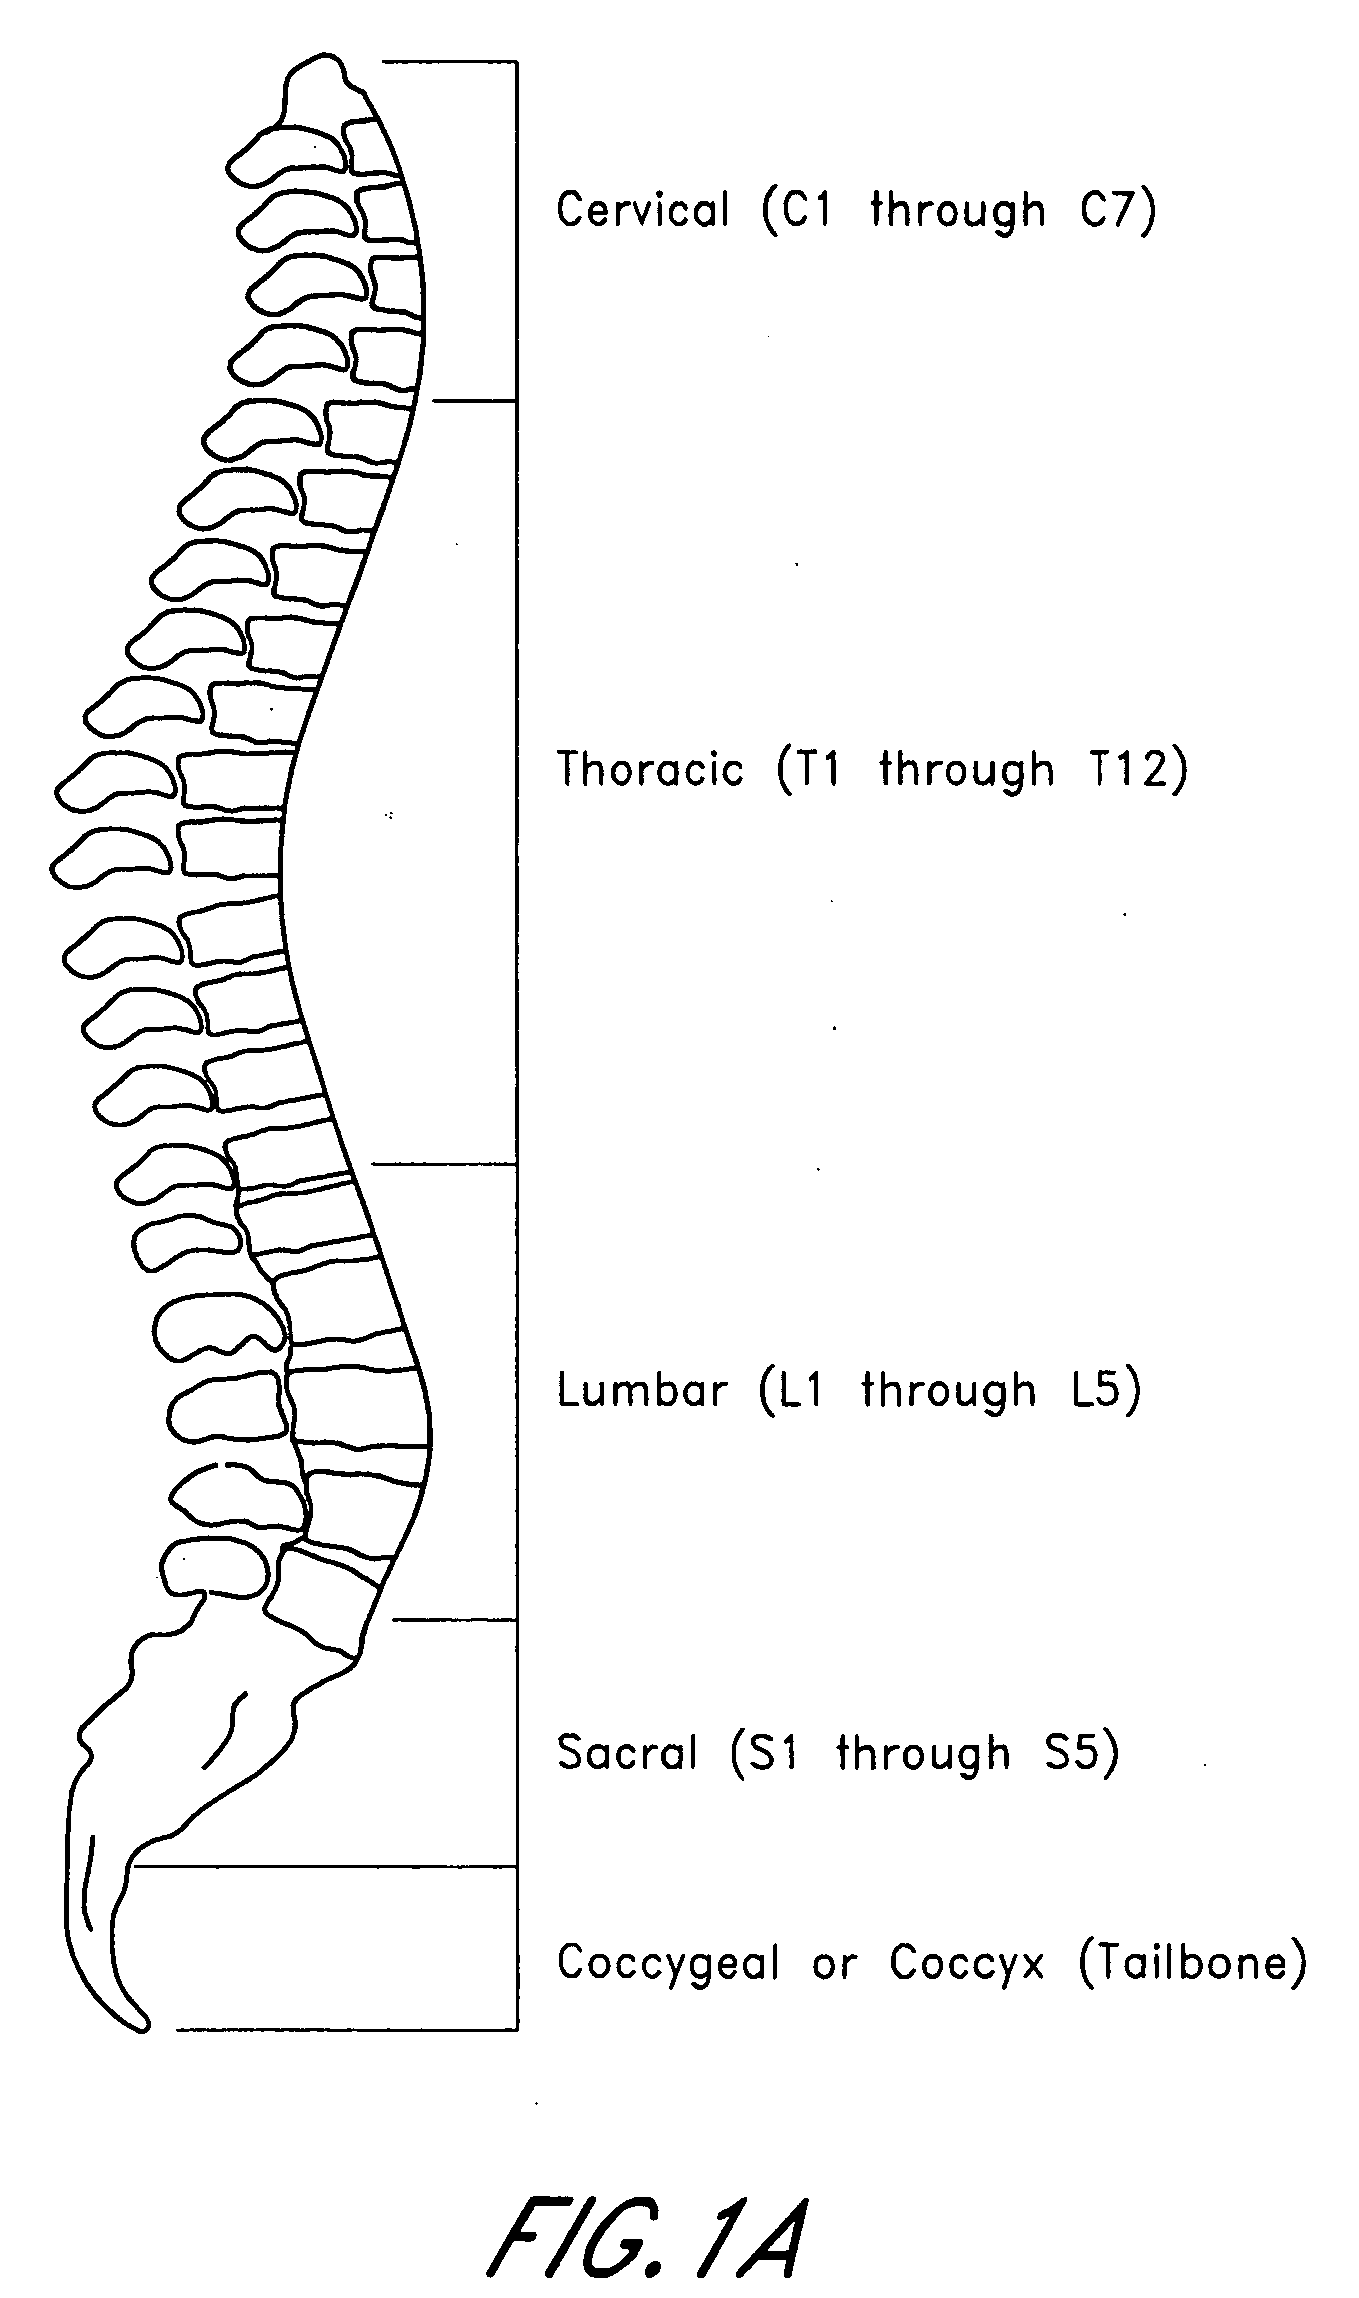 Guide pin for guiding instrumentation along a soft tissue tract to a point on the spine